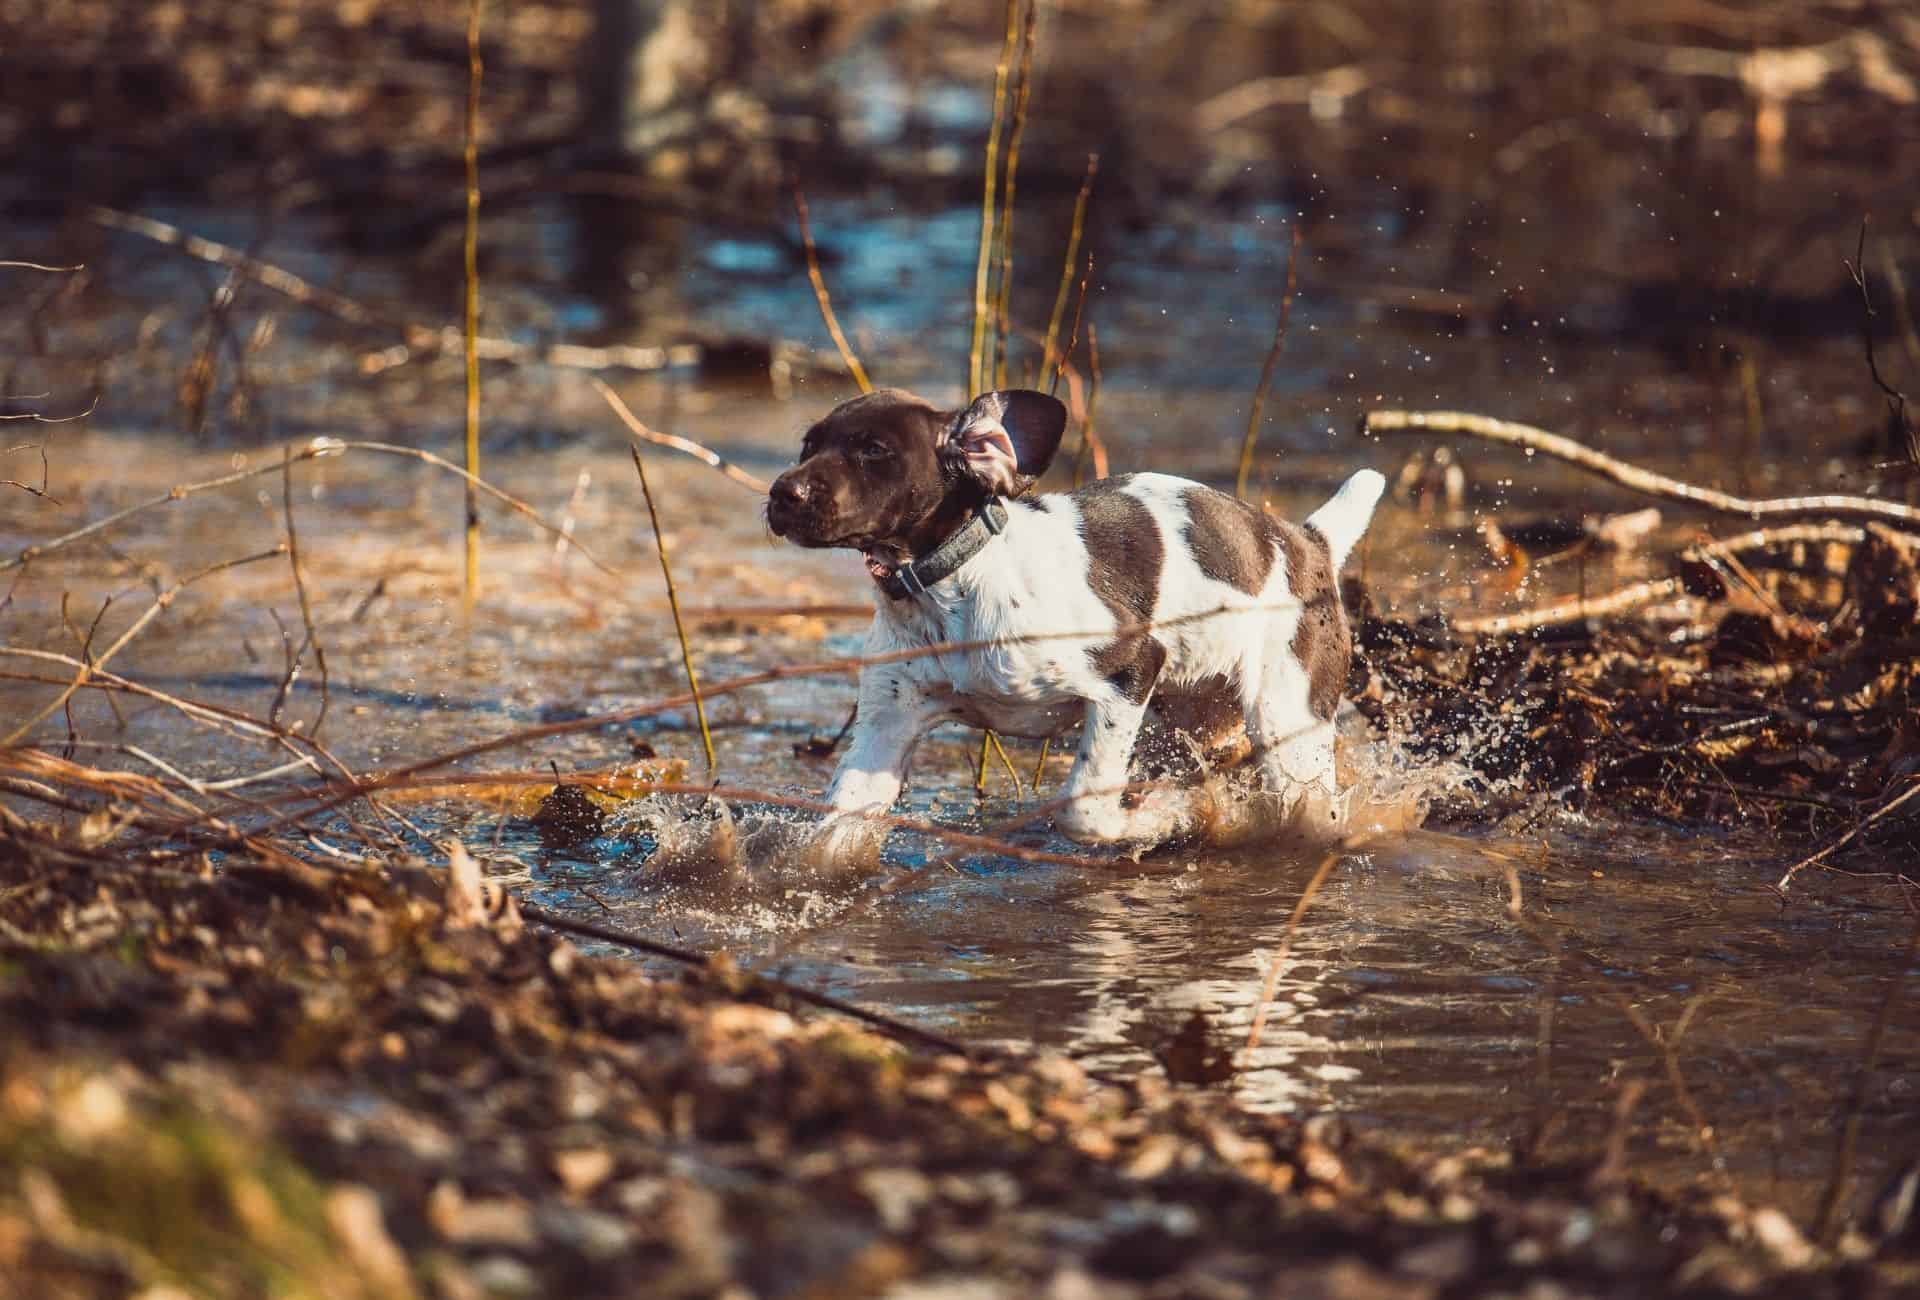 German Shorthaired Pointer puppy exploring off-leash, showing age-appropriate exercise to maintain proper growth.